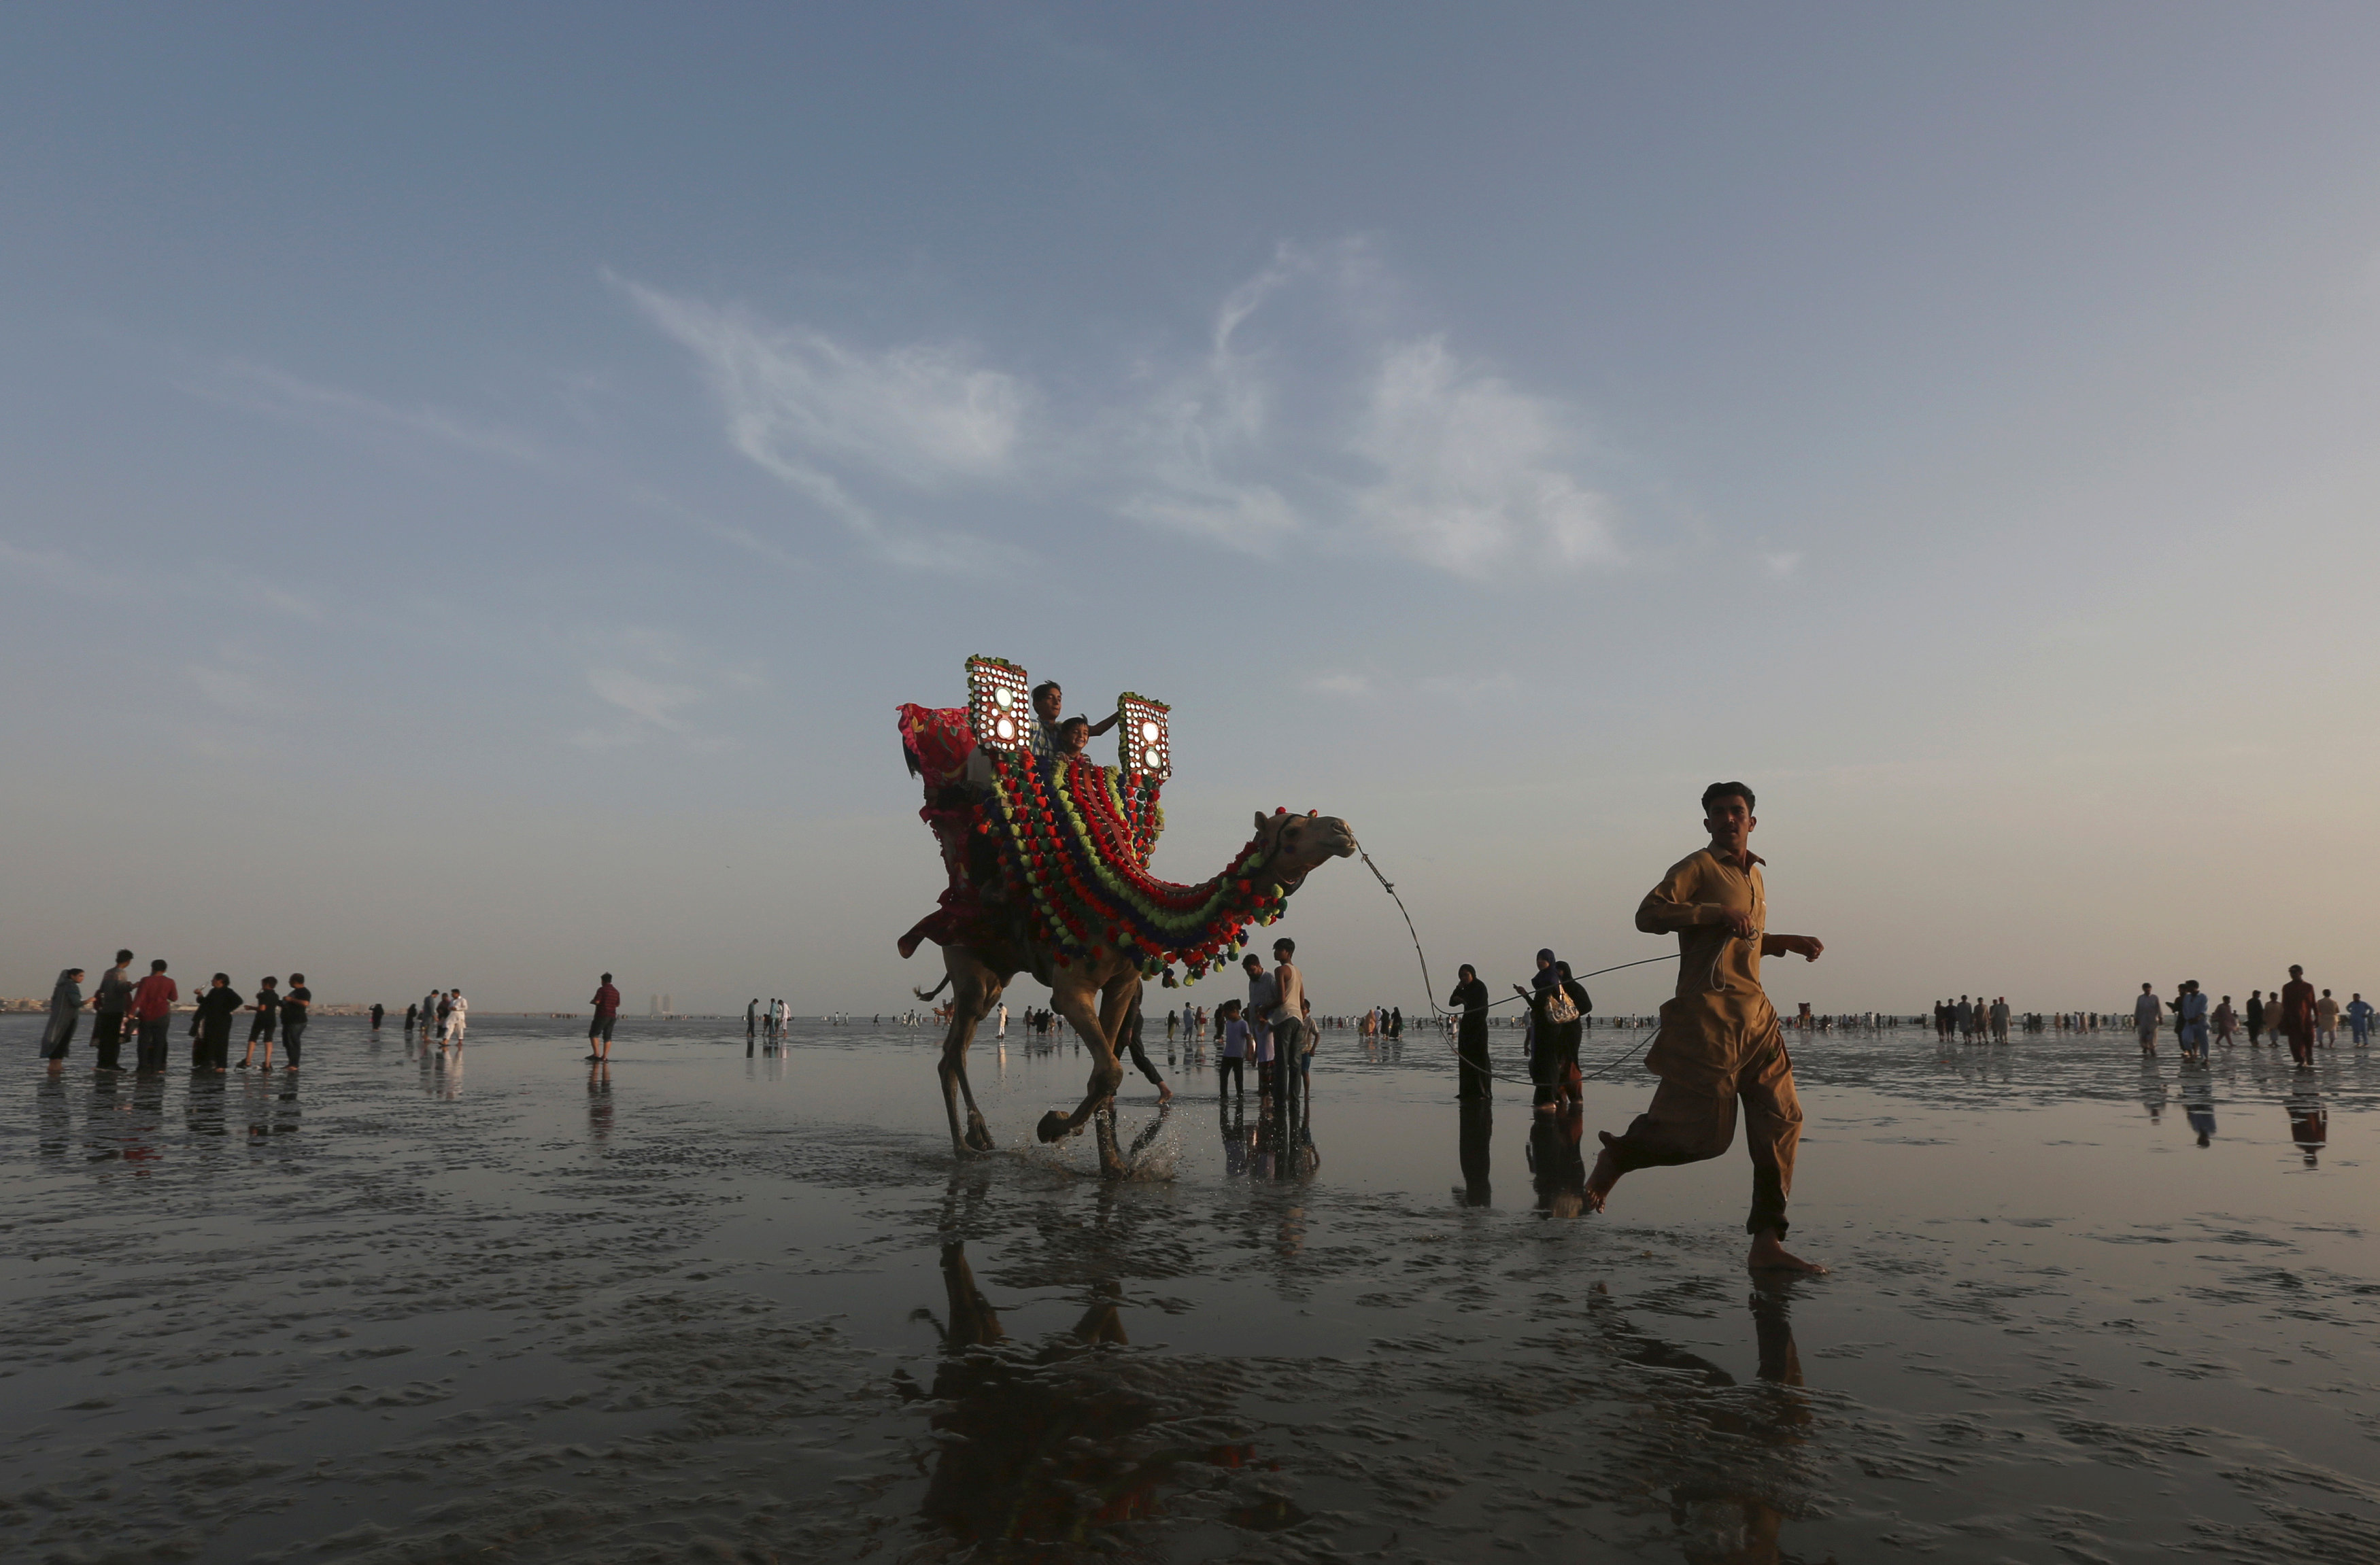 A man leads a camel with children taking a ride on it along the Clifton beach in Karachi, Pakistan March 12, 2017. REUTERS/Akhtar Soomro